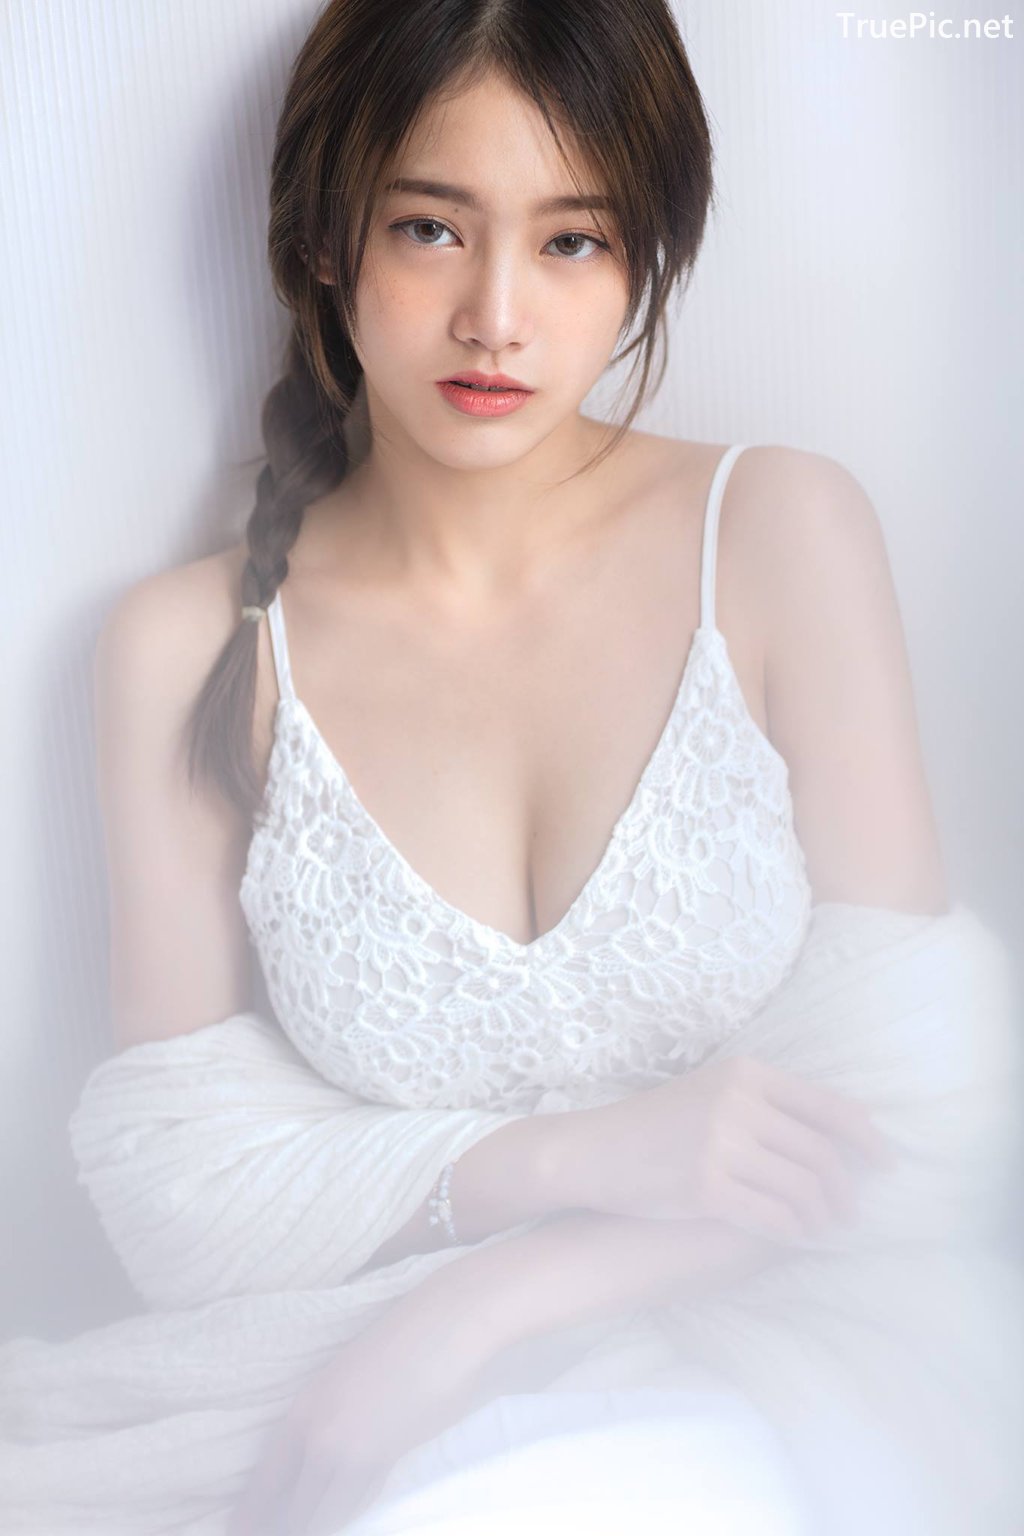 Image Thailand Model - Pimploy Chitranapawong - Beautiful In White - TruePic.net - Picture-20